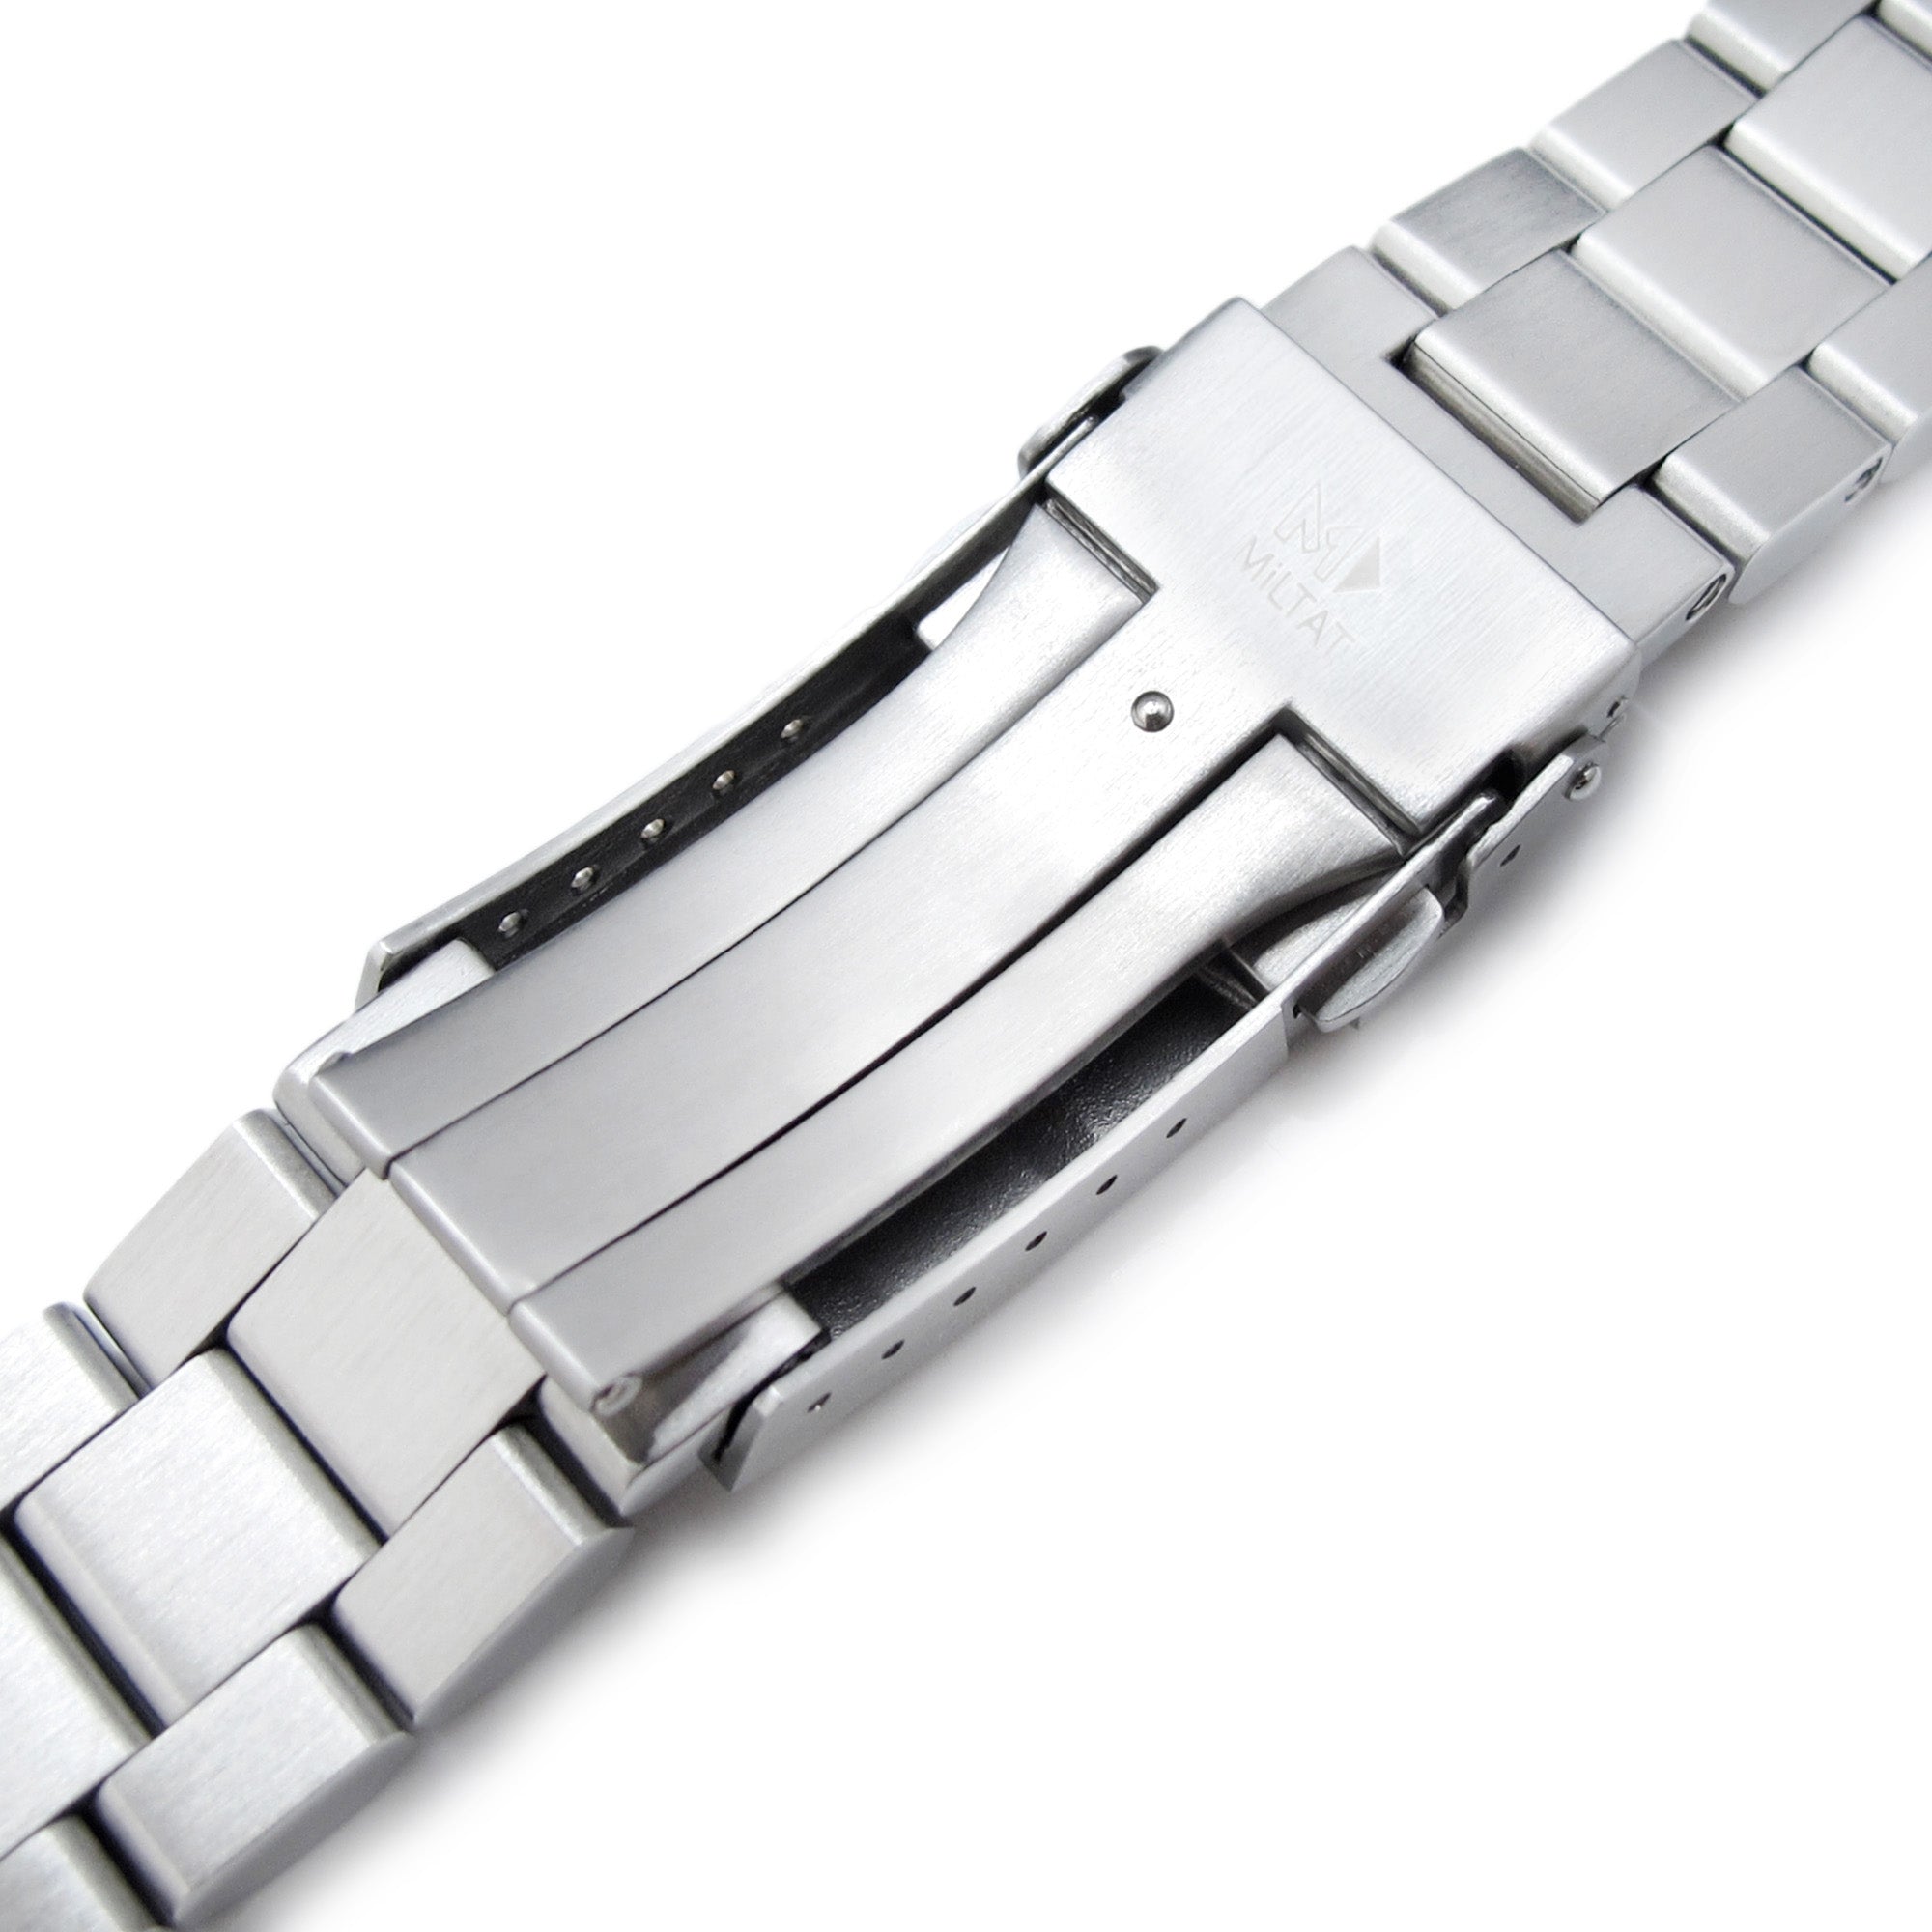 22mm Hexad Watch Band compatible with Seiko Samurai SRPB51, 316L Stainless Steel Brushed SUB Diver Clasp